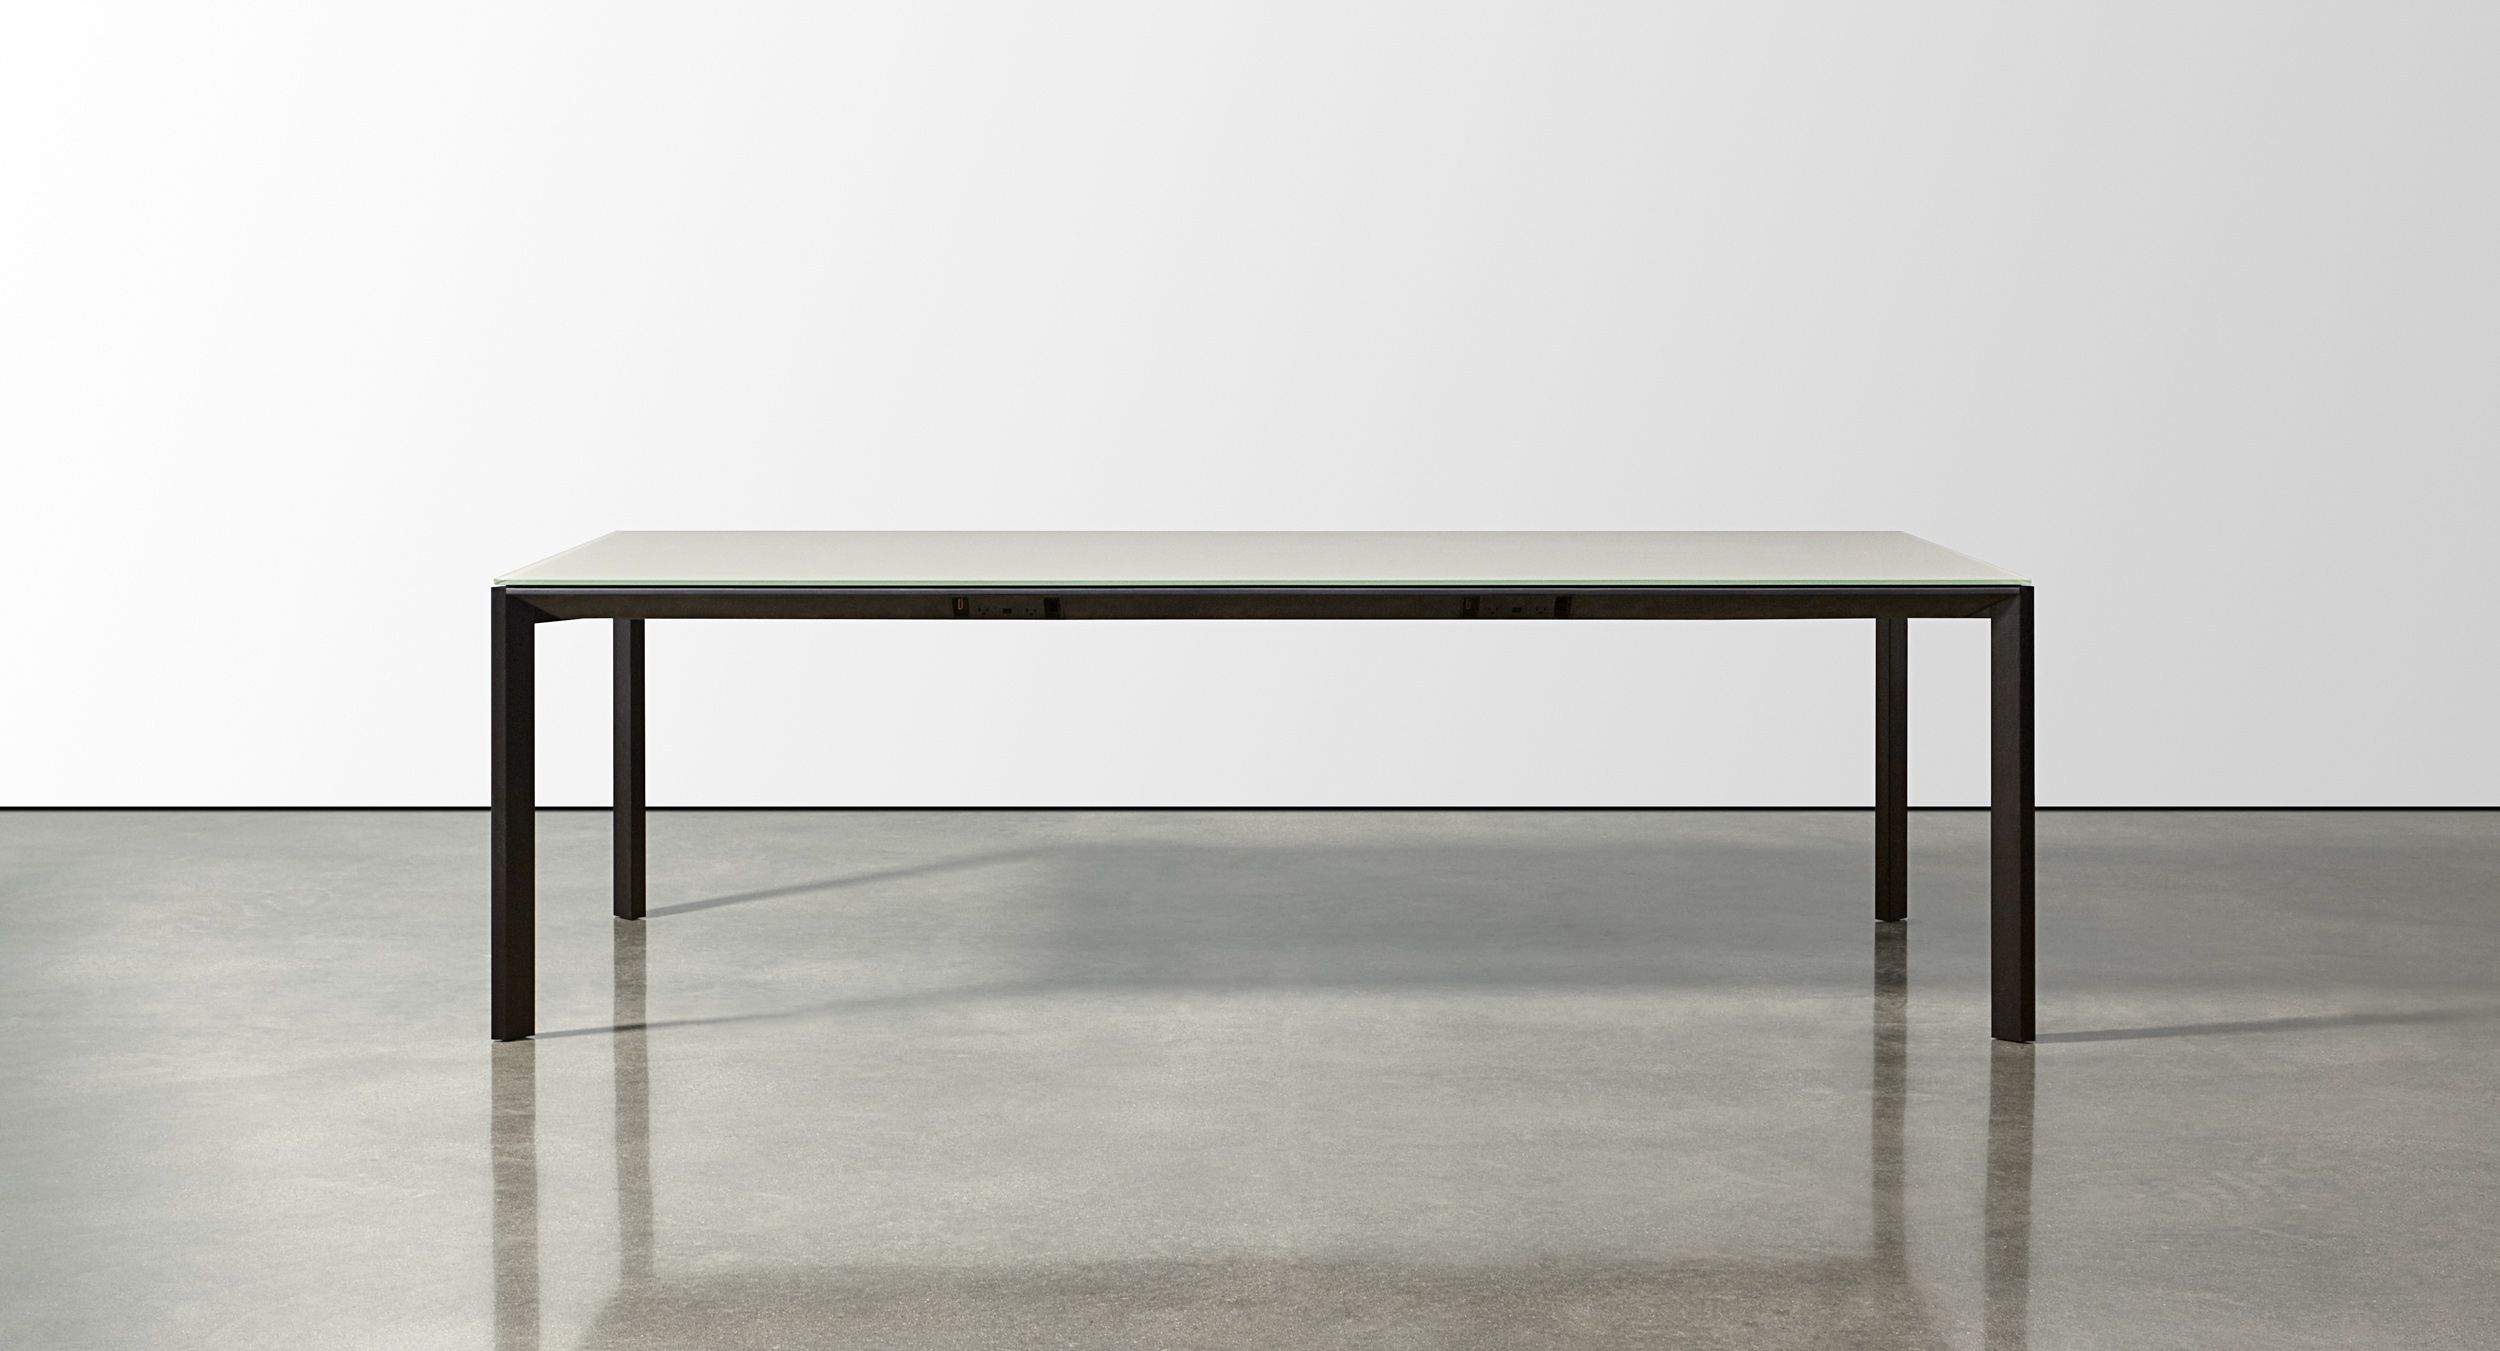 Halo tables are available in a full range of materials, sizes, and shapes to suit any project need.